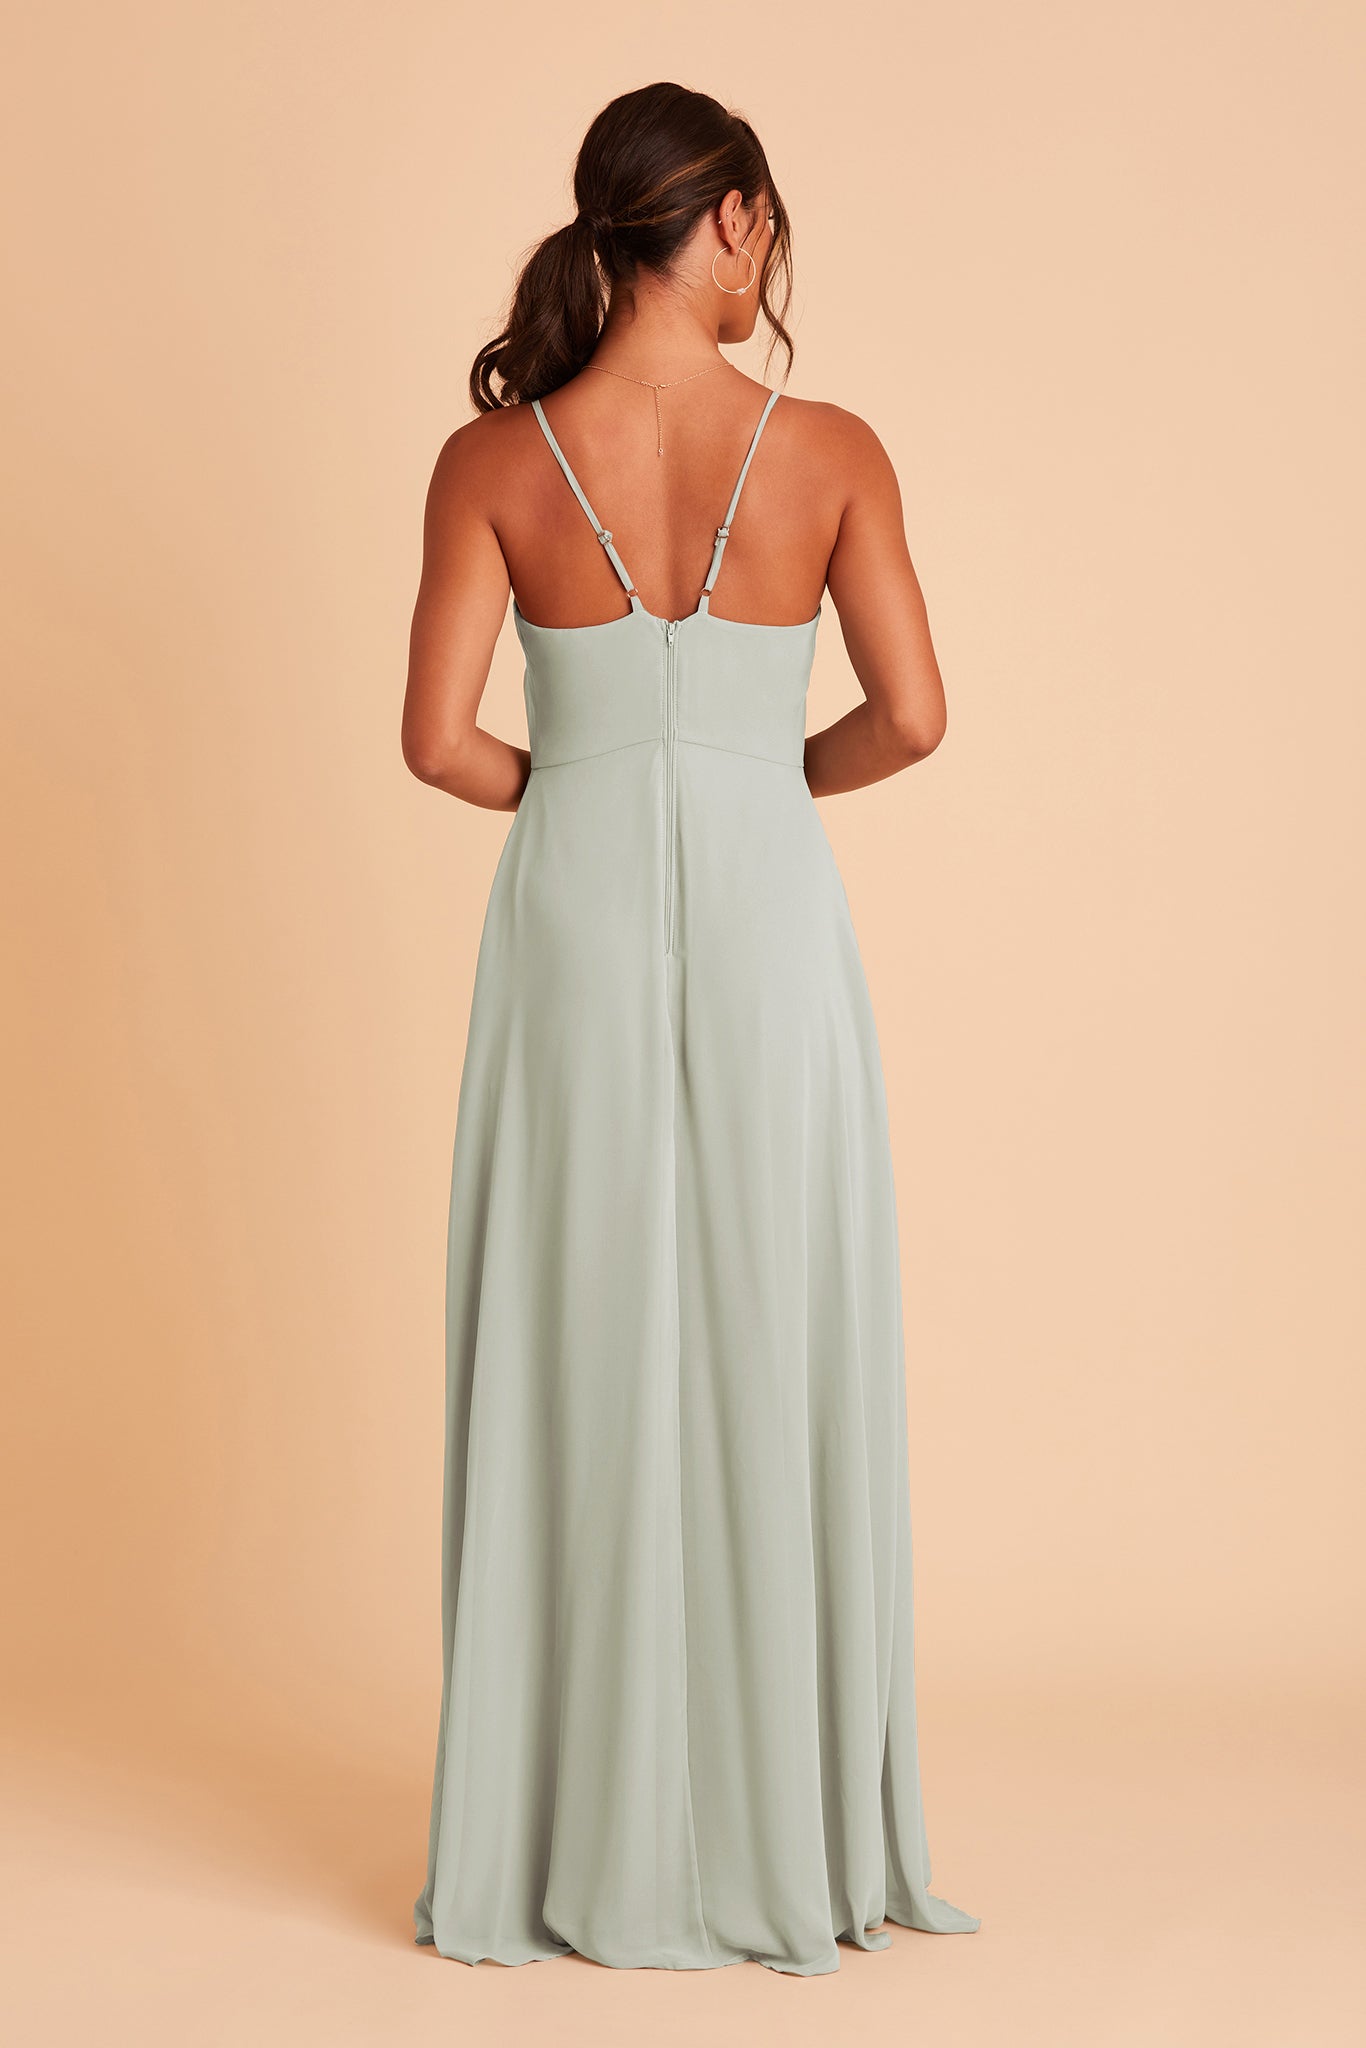 Back view of the Theresa Dress in sage chiffon with the optional slit shows the adjustable, angled shoulder straps attached at the bodice center seam. The hidden zipper is shown in the bodice and skirt center seam. 